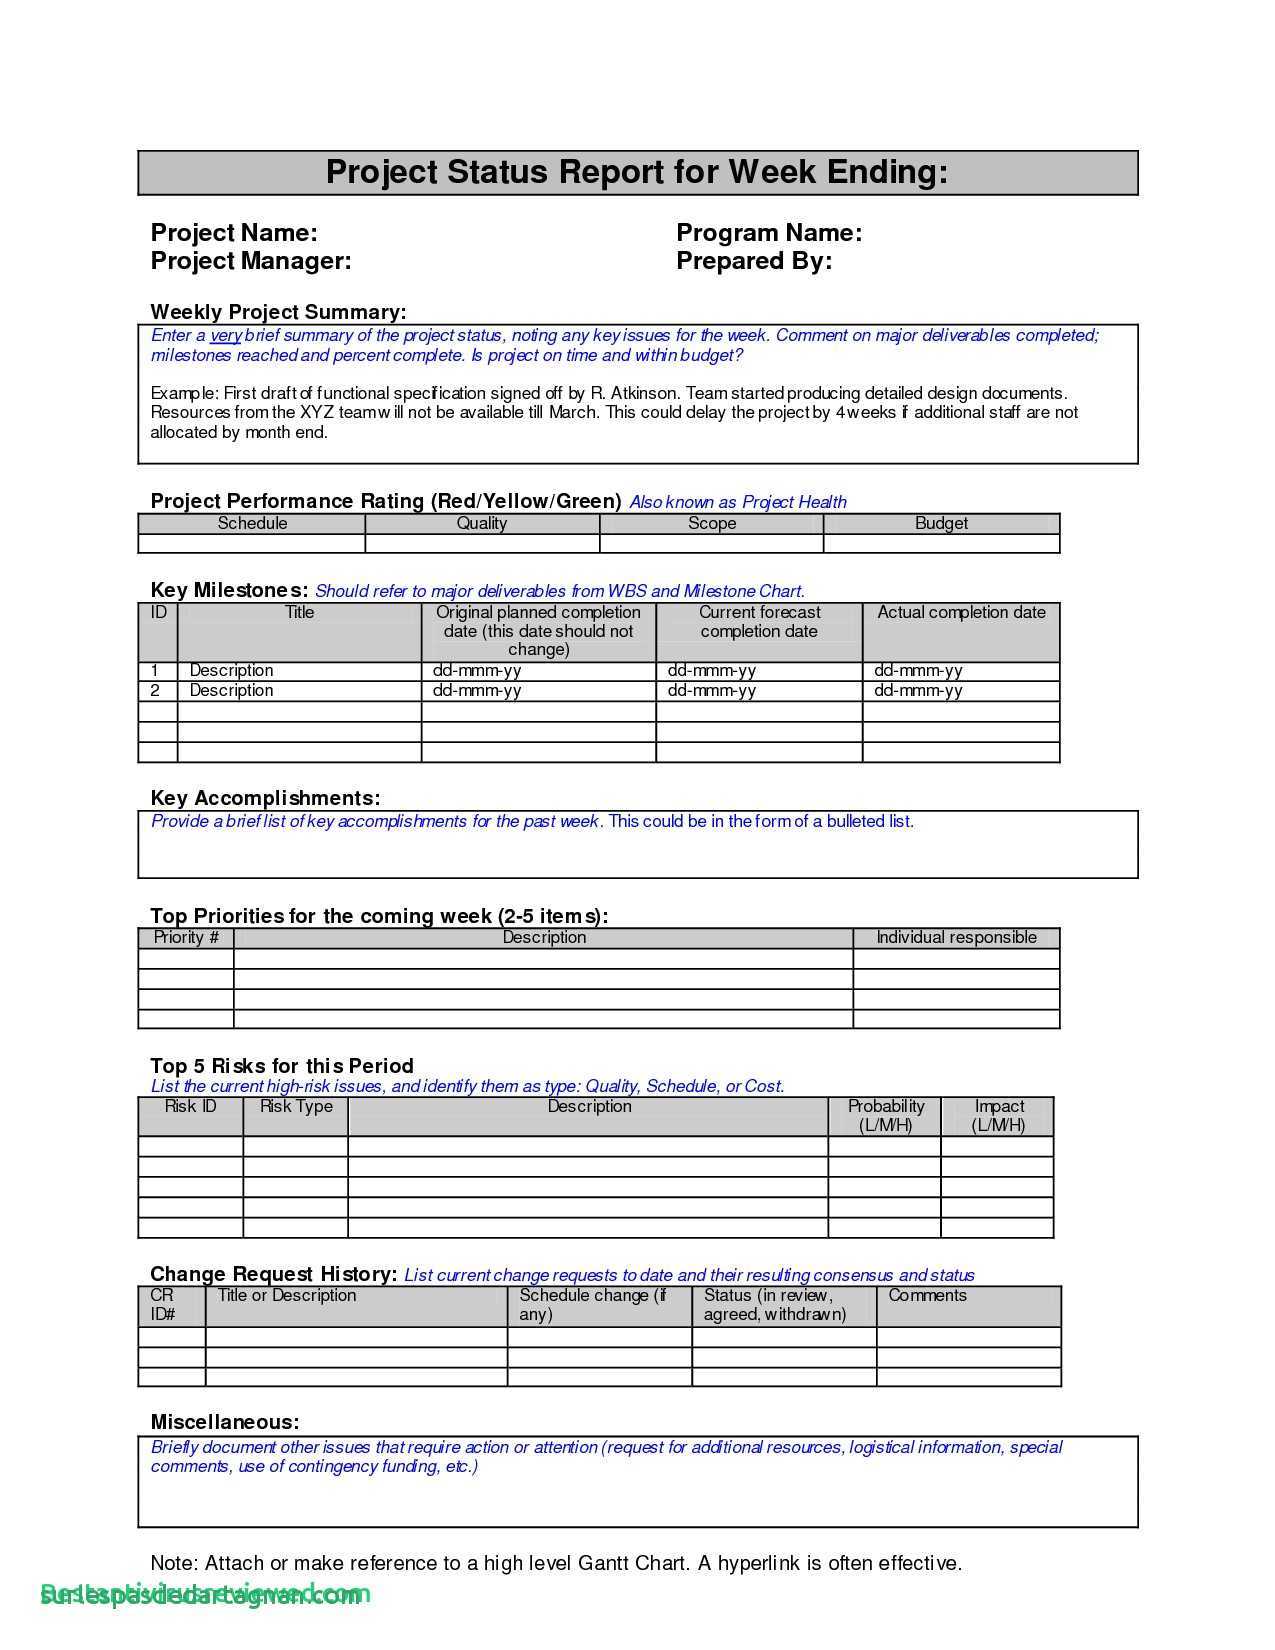 12 Conflict Minerals Reporting Template Example | Radaircars Pertaining To Conflict Minerals Reporting Template